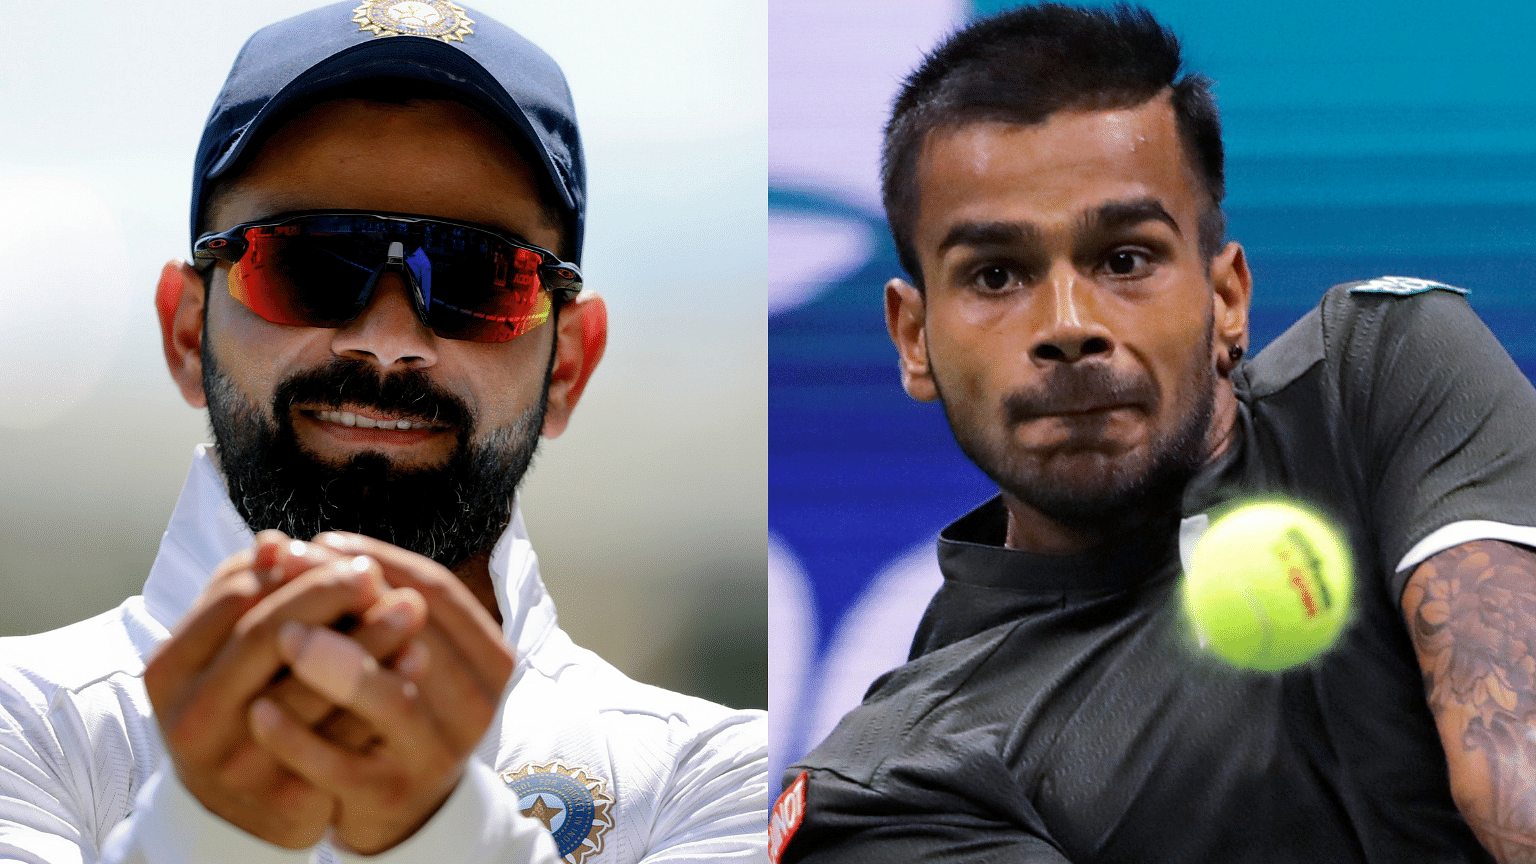 Sumit Nagal revealed that he got financial support from Virat Kohli during crunch times.